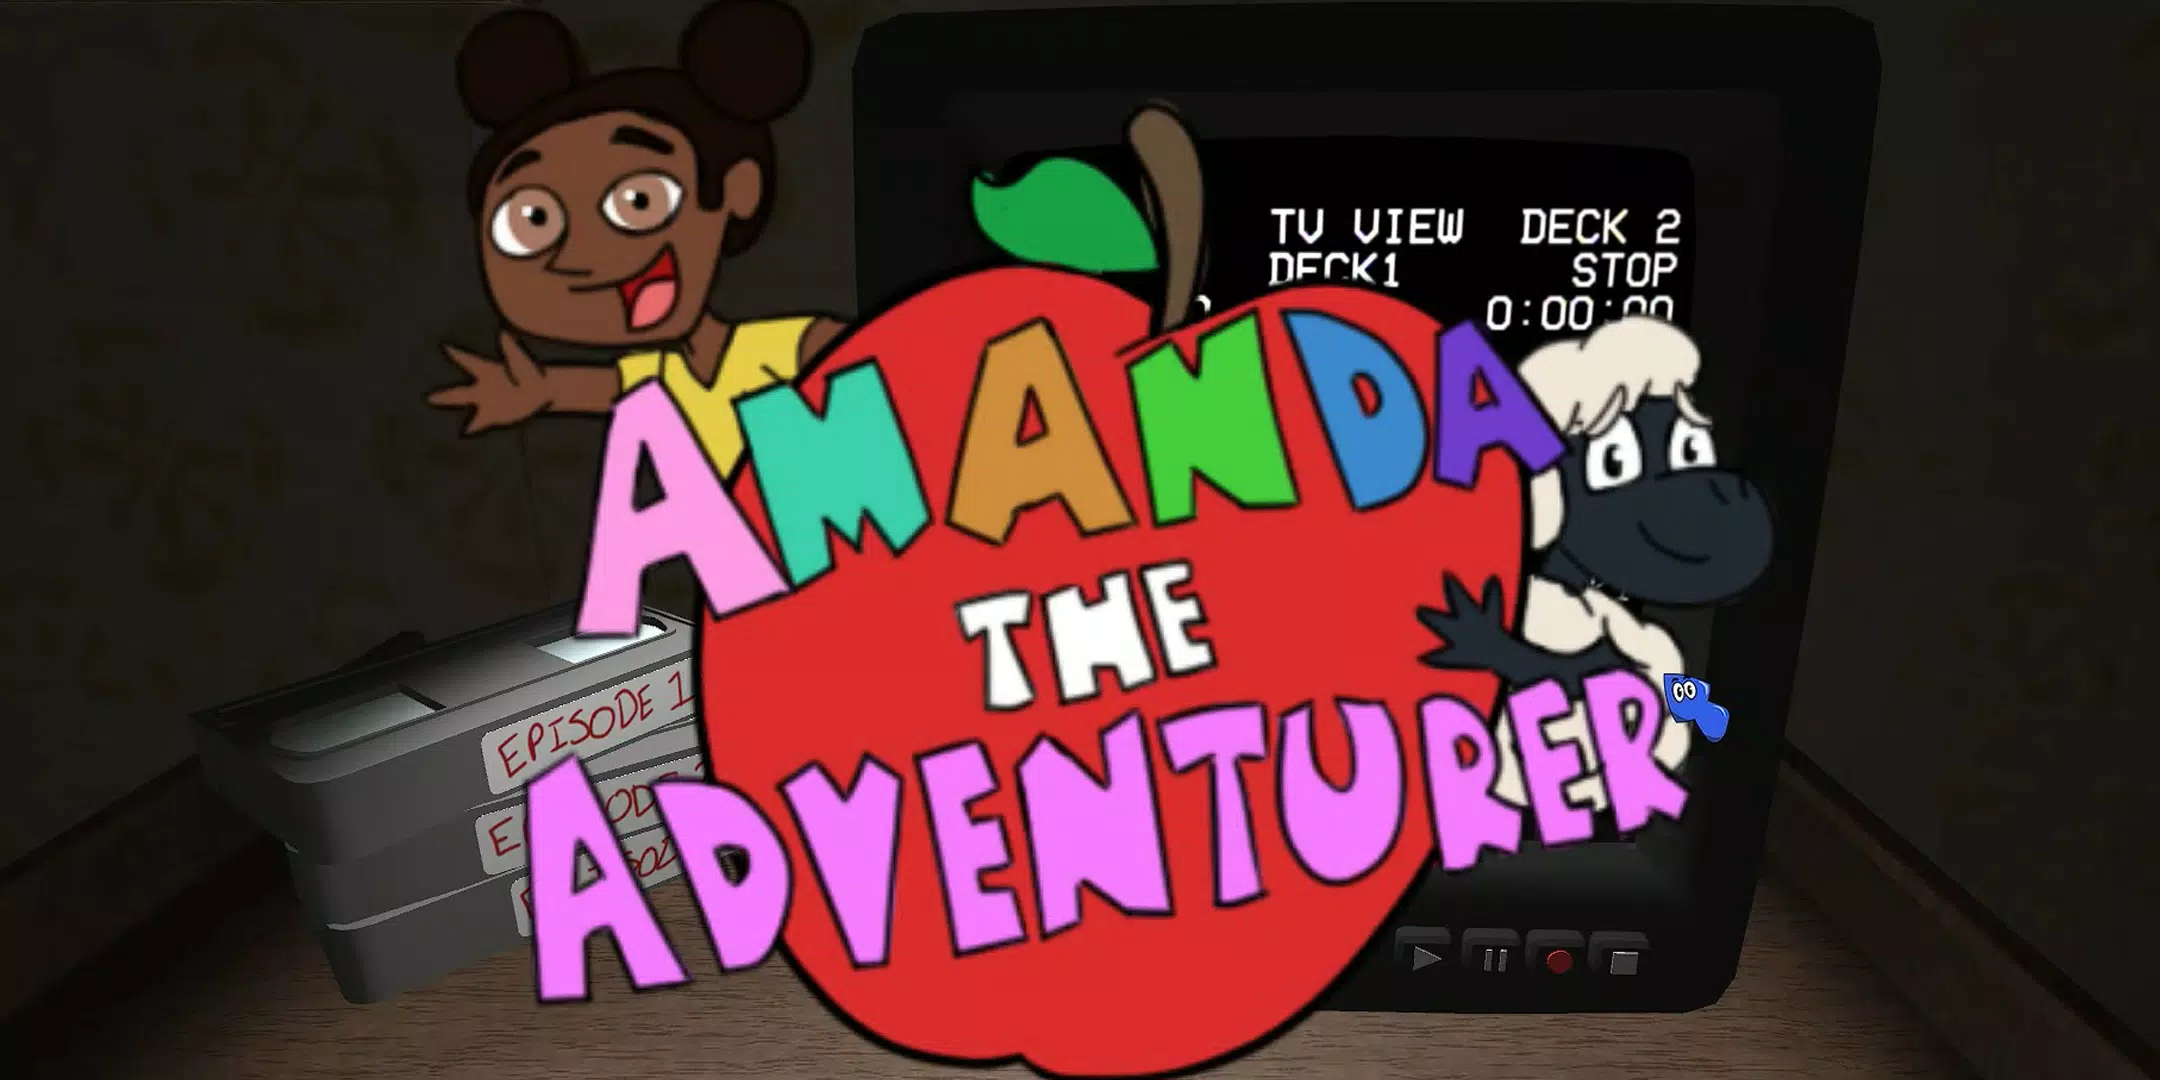 Amanda The Adventurer is SCARY!! (FULL GAME) 